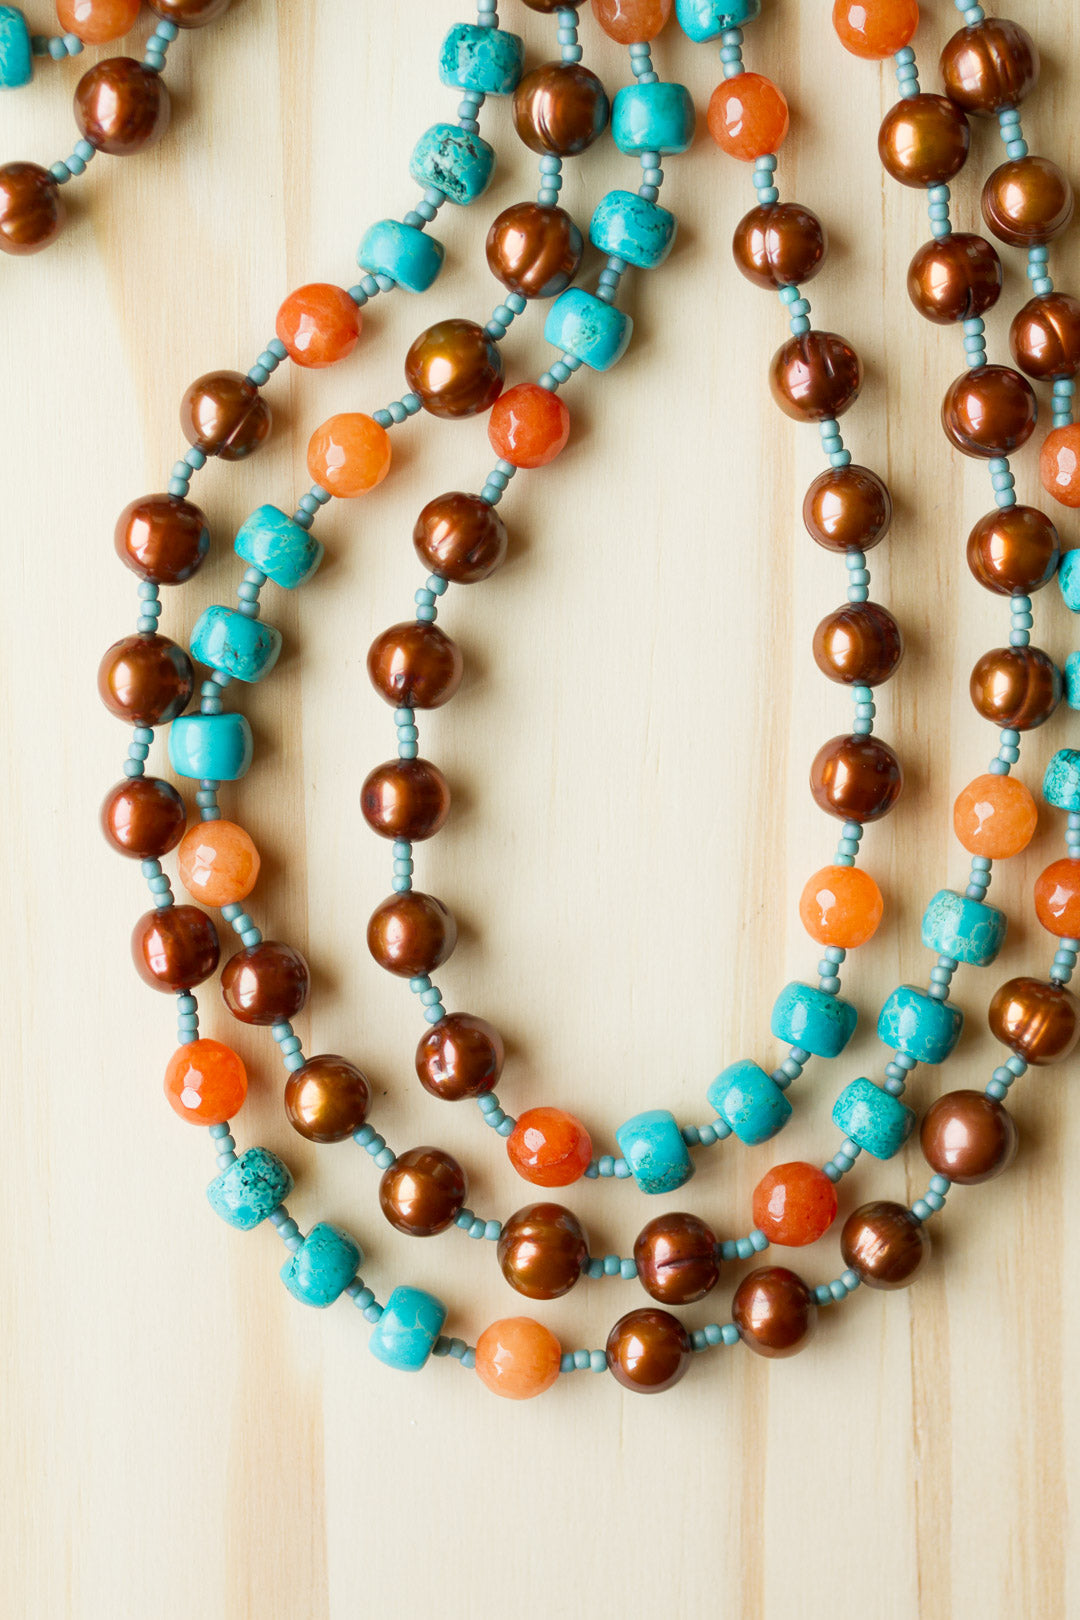 60" Extra Long Brown Freshwater Pearl Beaded Wraparound Necklace with Orange Agate & Turquoise Beads - My Urban Gems